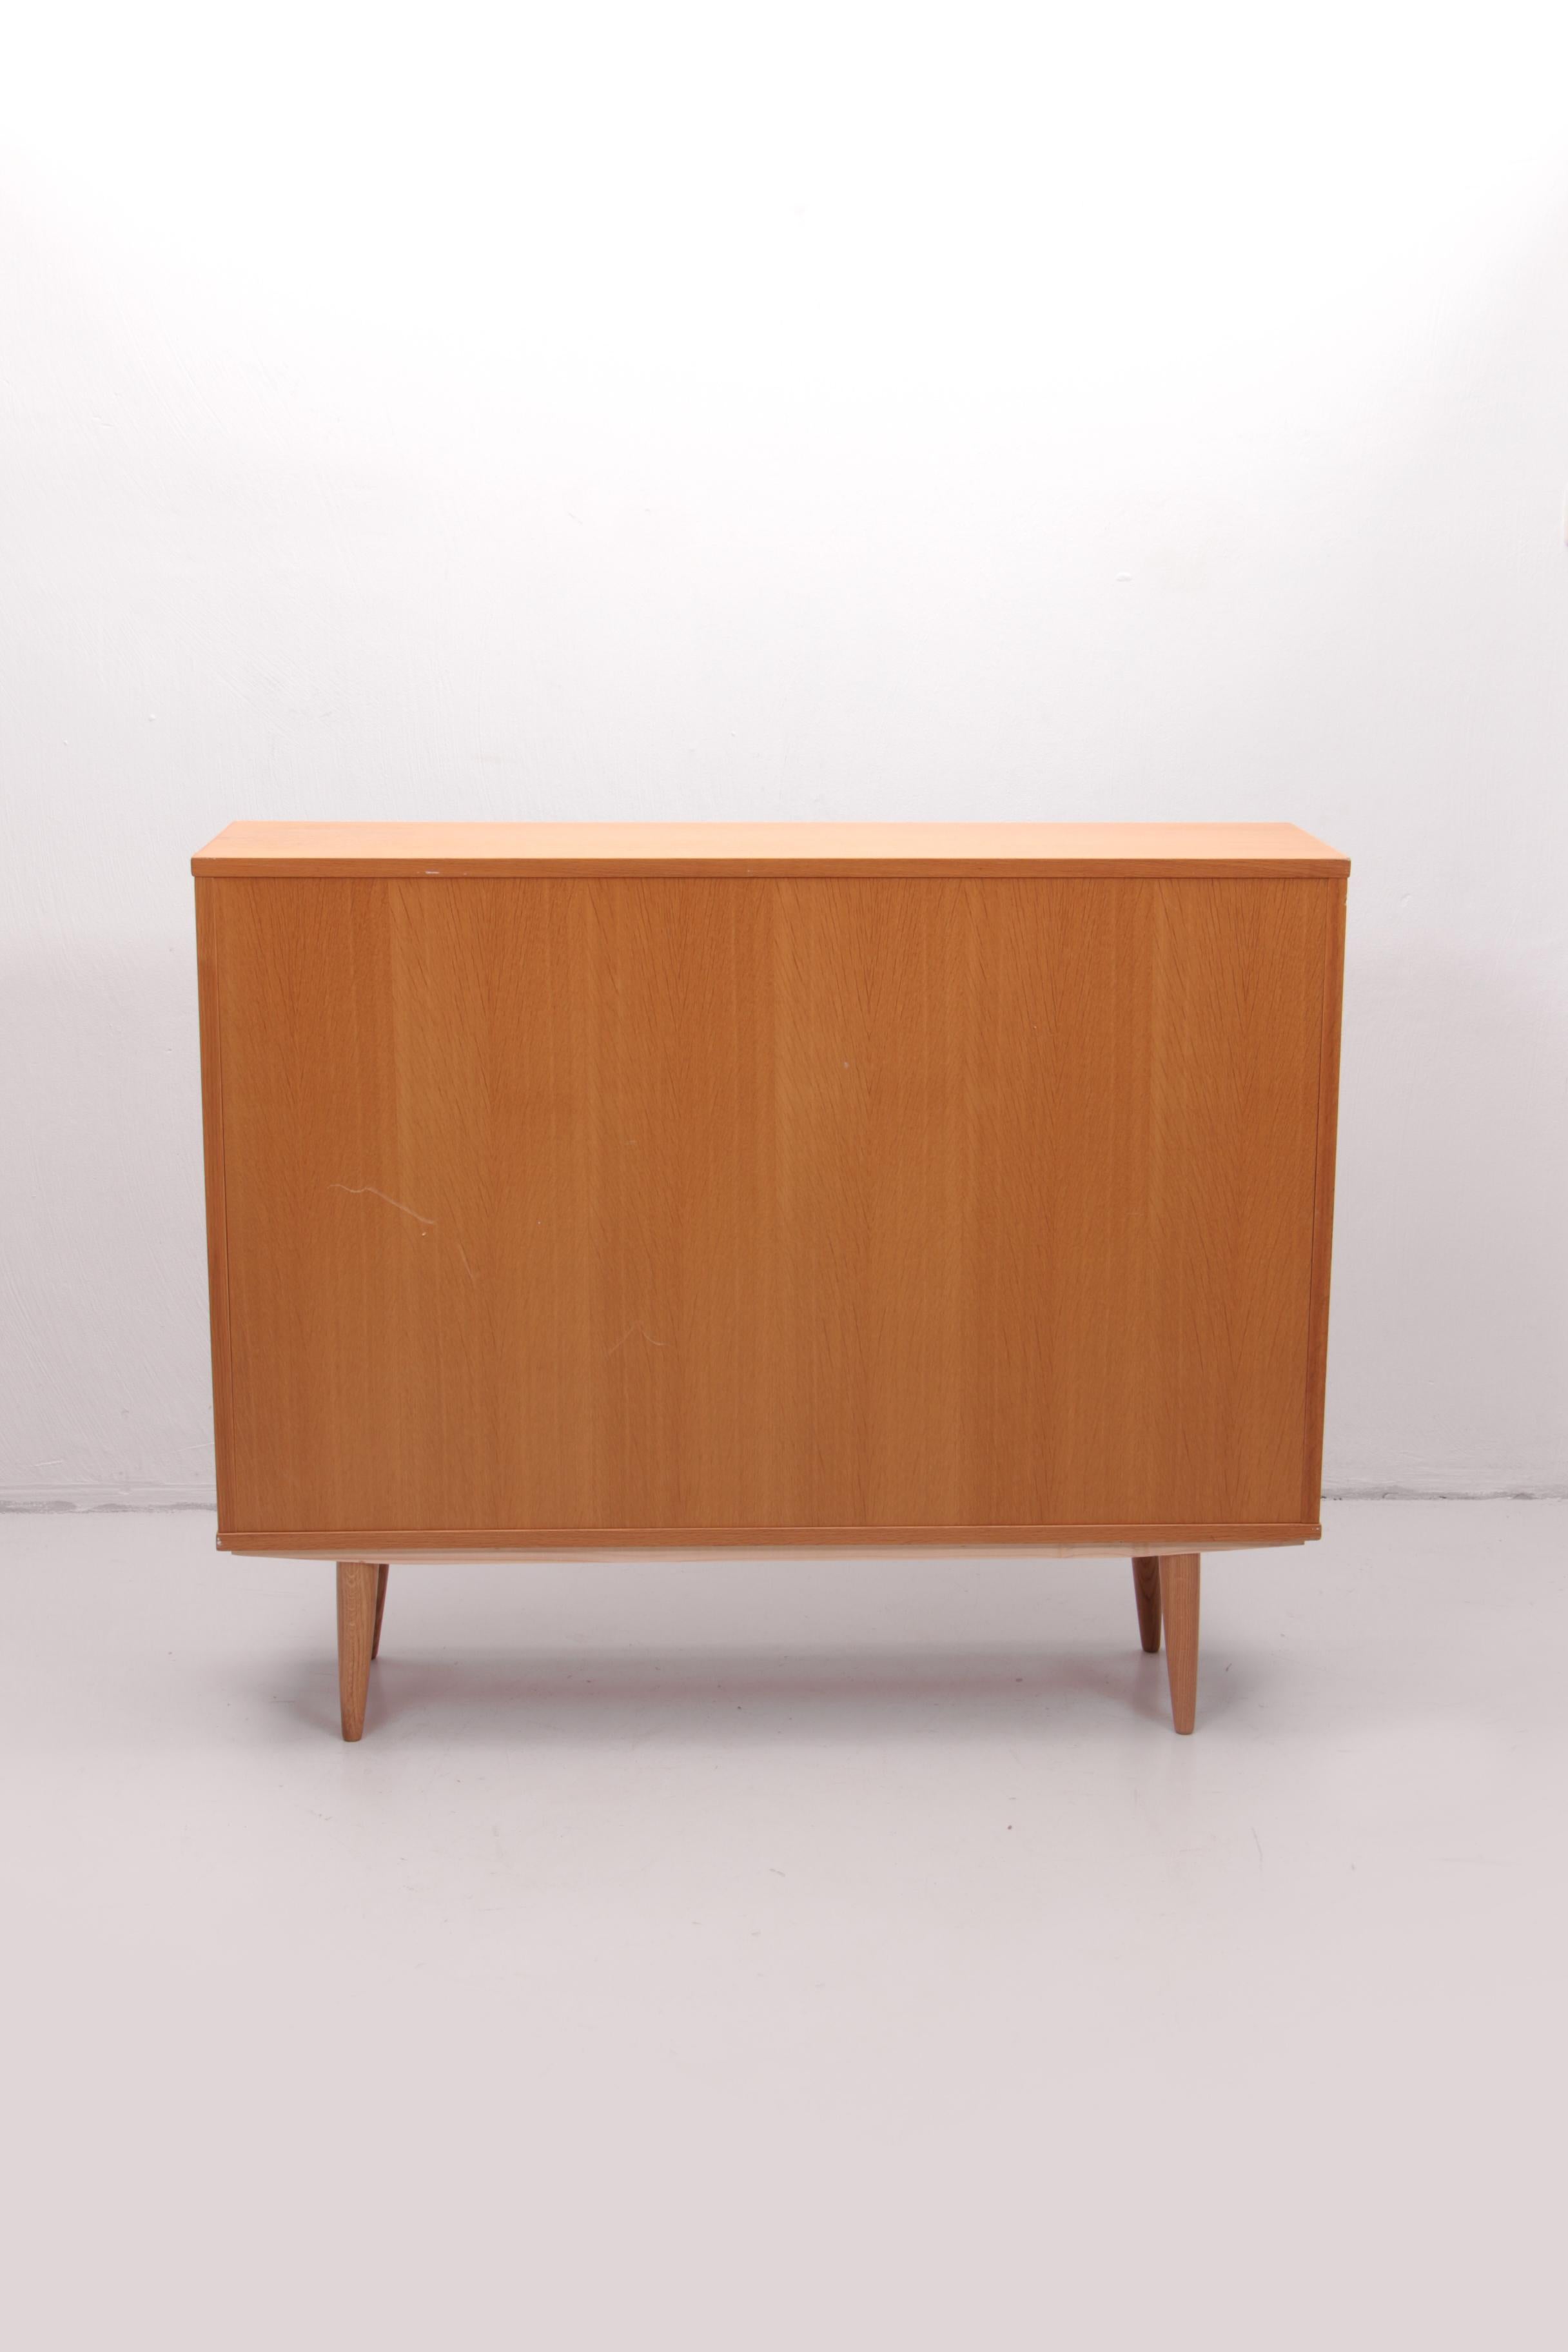 Mid-20th Century Danish Design Bookcase Made by Poul Hundevad, 1960, Denmark For Sale